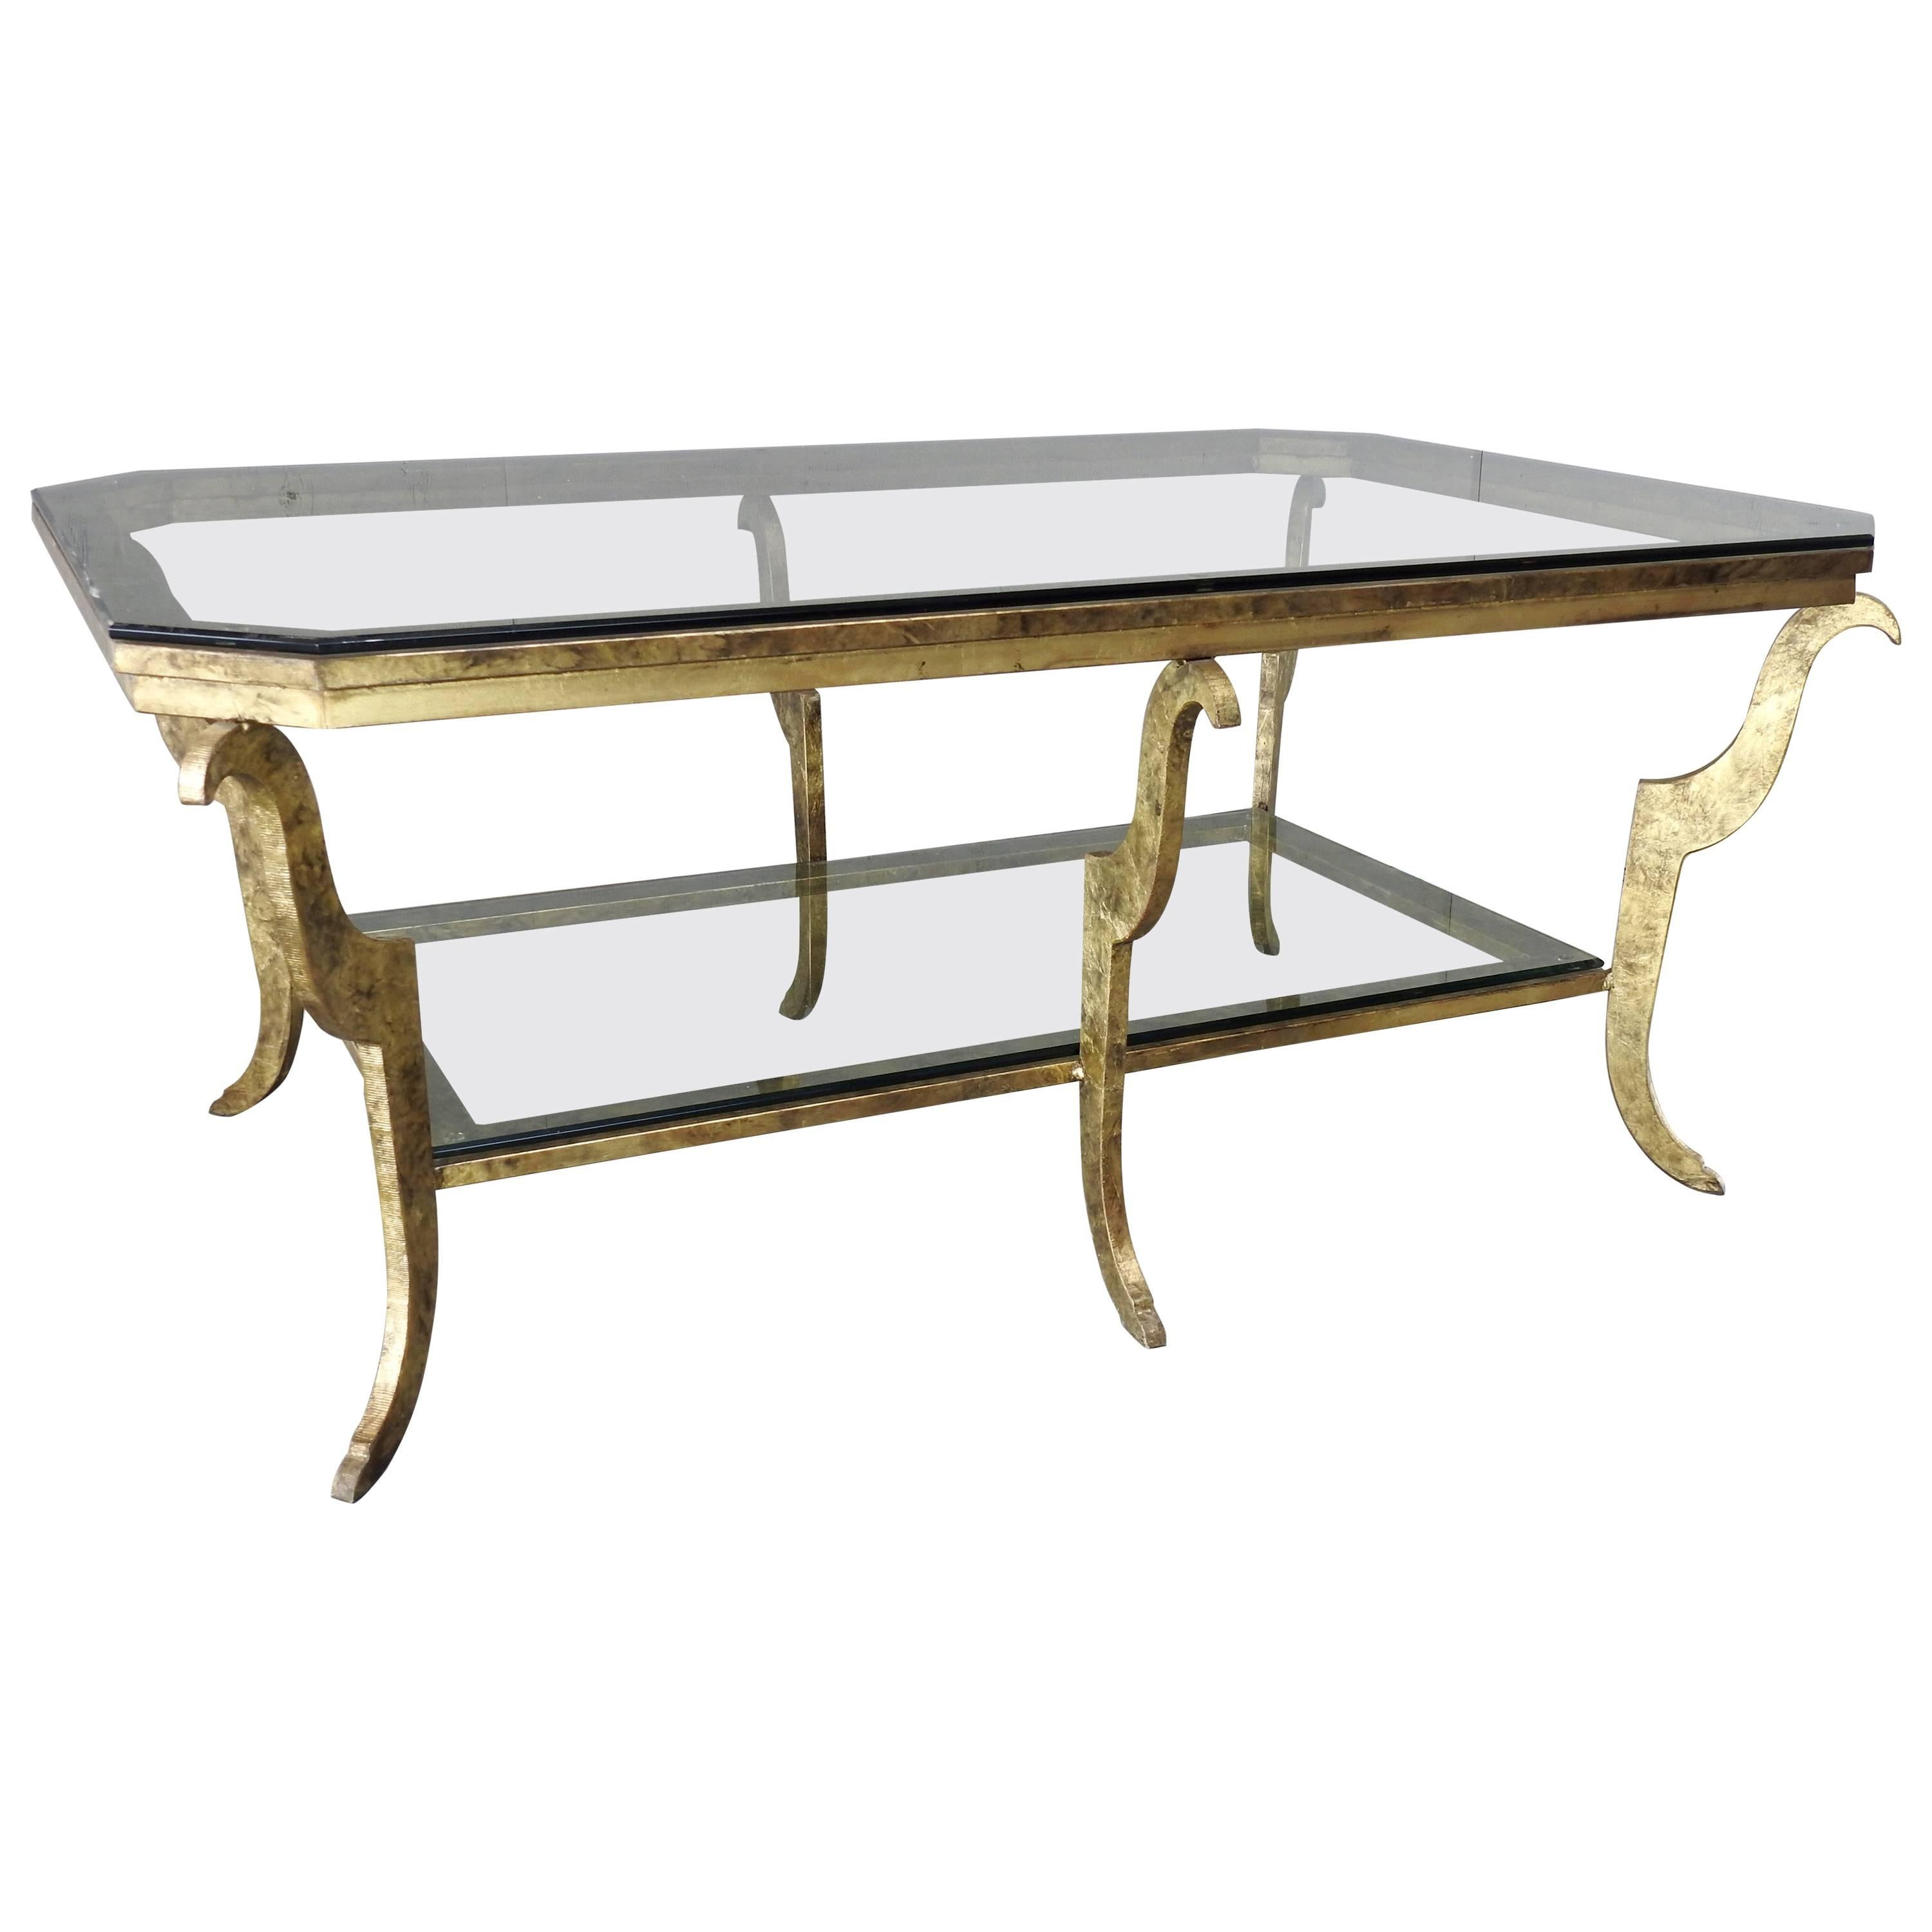 Swaim Hollywood Regency Gilded Steel and Beveled Glass Top Cocktail Table